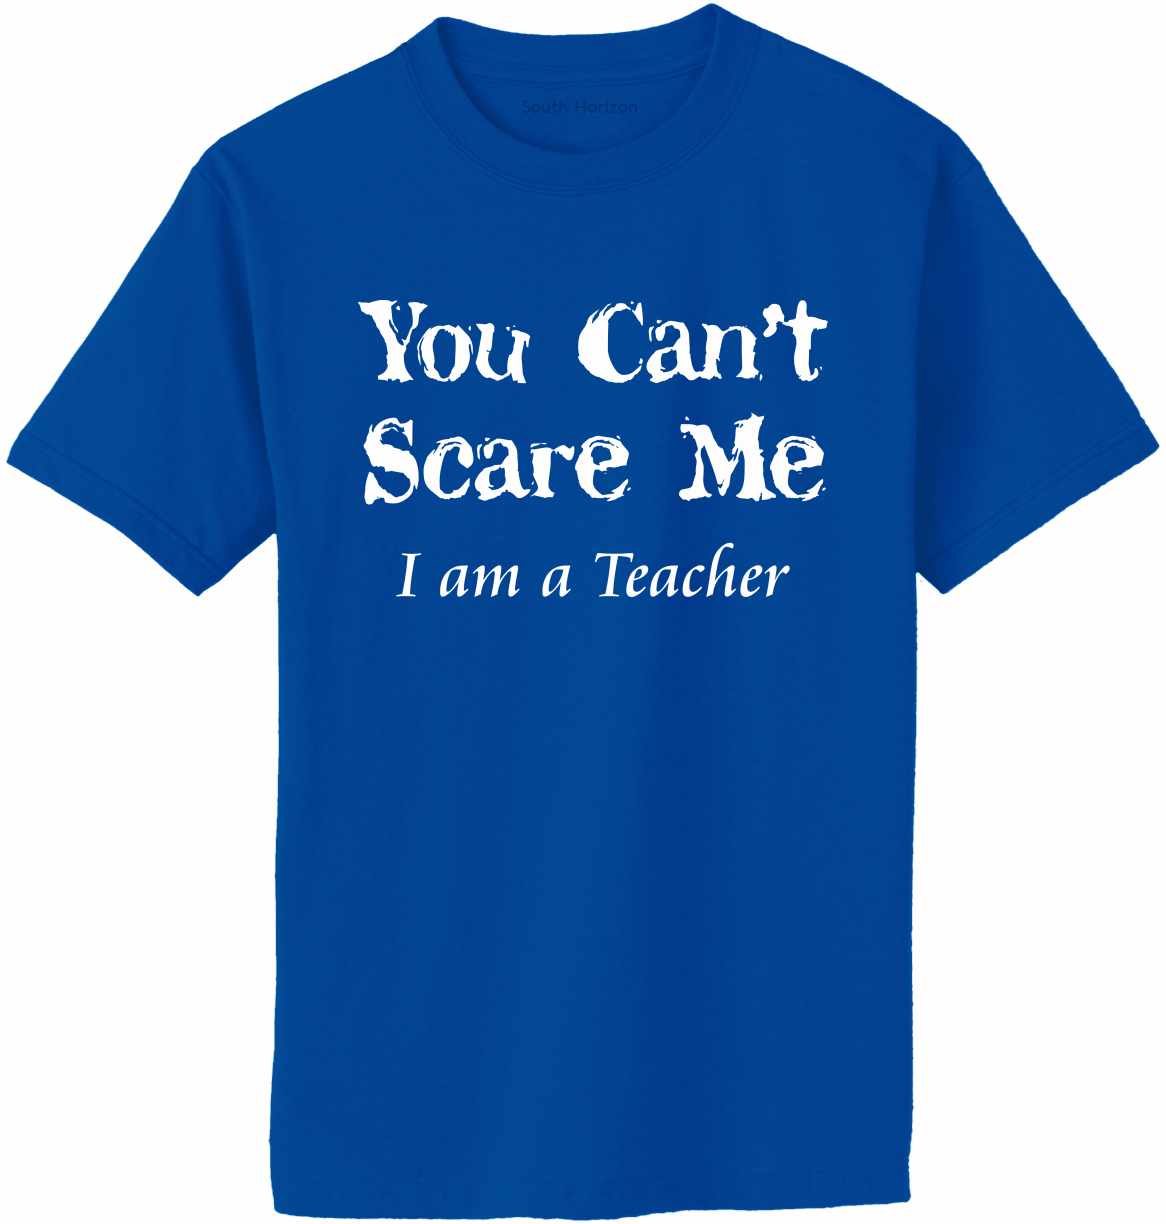 You Can't Scare Me I am a Teacher Adult T-Shirt (#848-1)